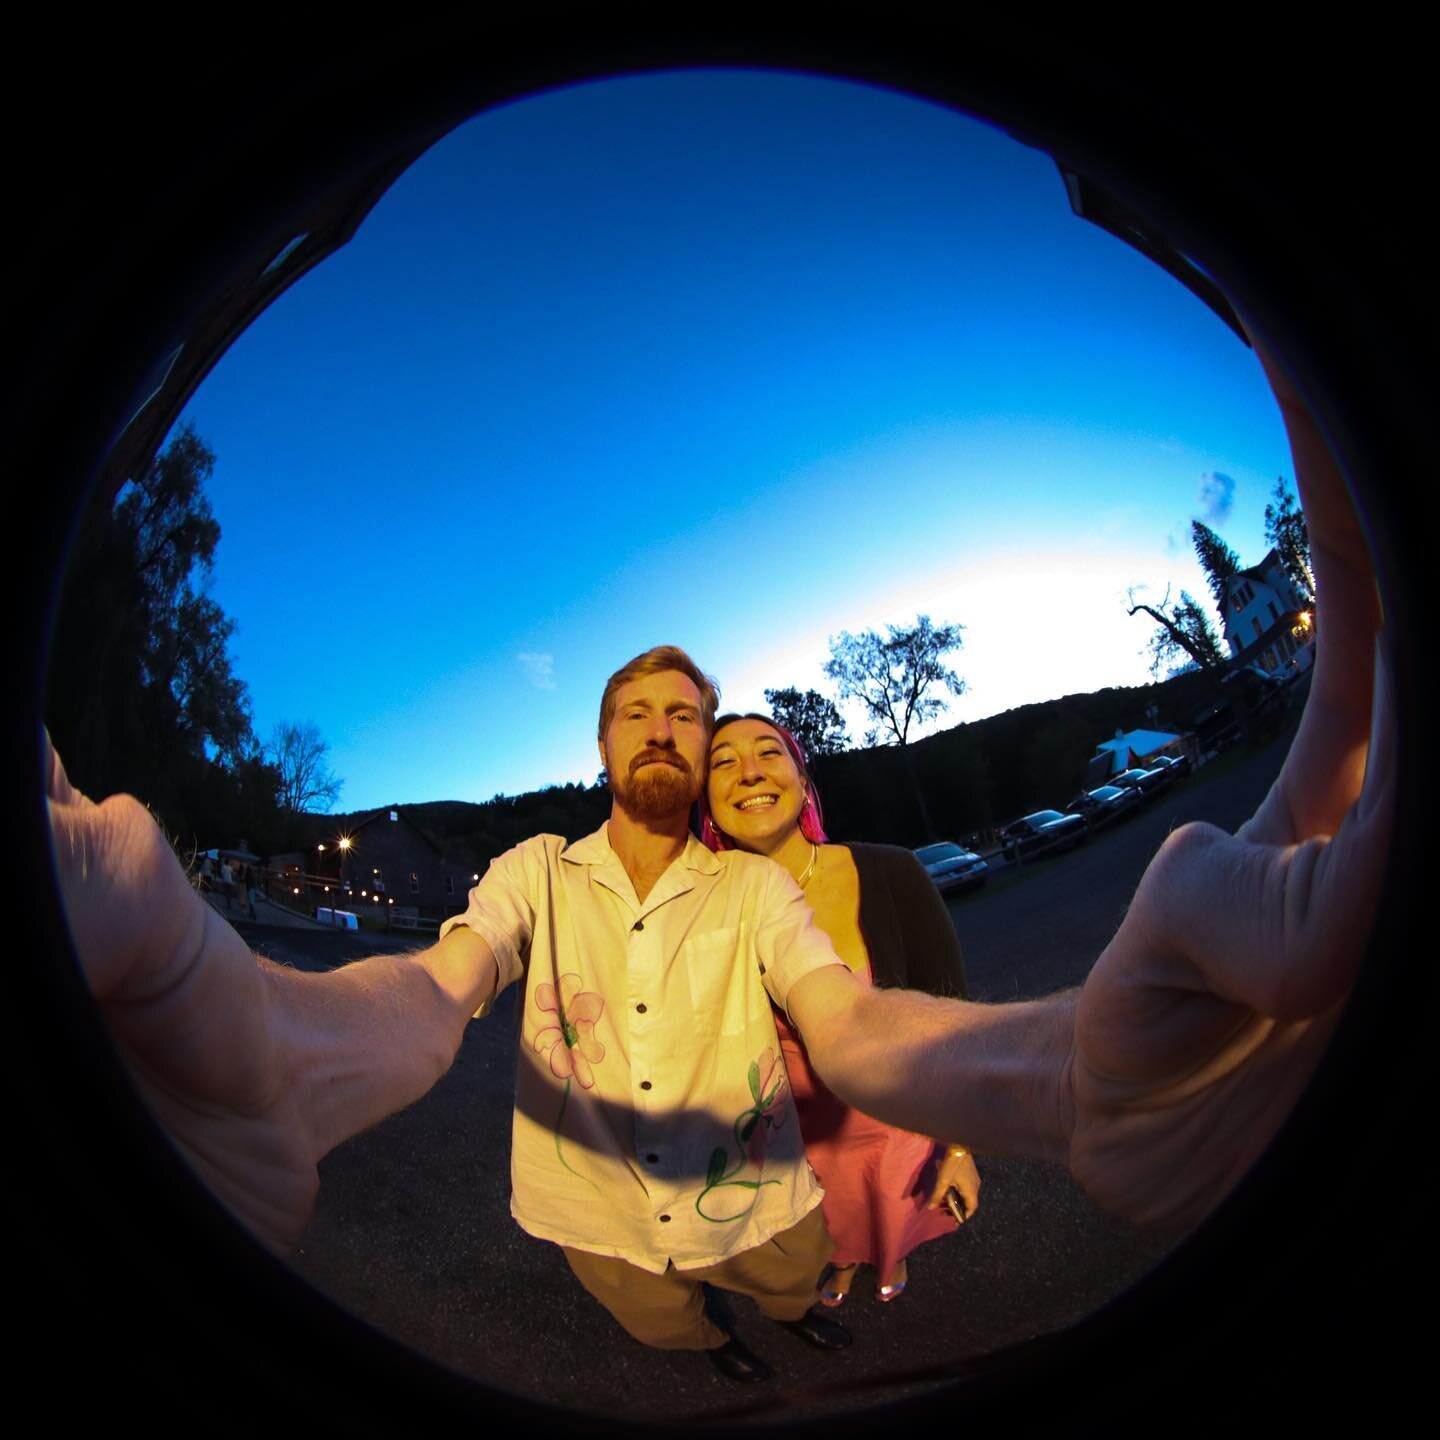 Chris appreciation post!! Our 2 year anniversary was 2 days ago!!! 🤩🤩🤩🤩🤩 here&rsquo;s to many more years of loving you!!!! 😍&hearts;️😍&hearts;️ &amp; an introduction of my new fisheye lens 😂 I love you so much @topherlibbey 👩&zwj;❤️&zwj;💋&z